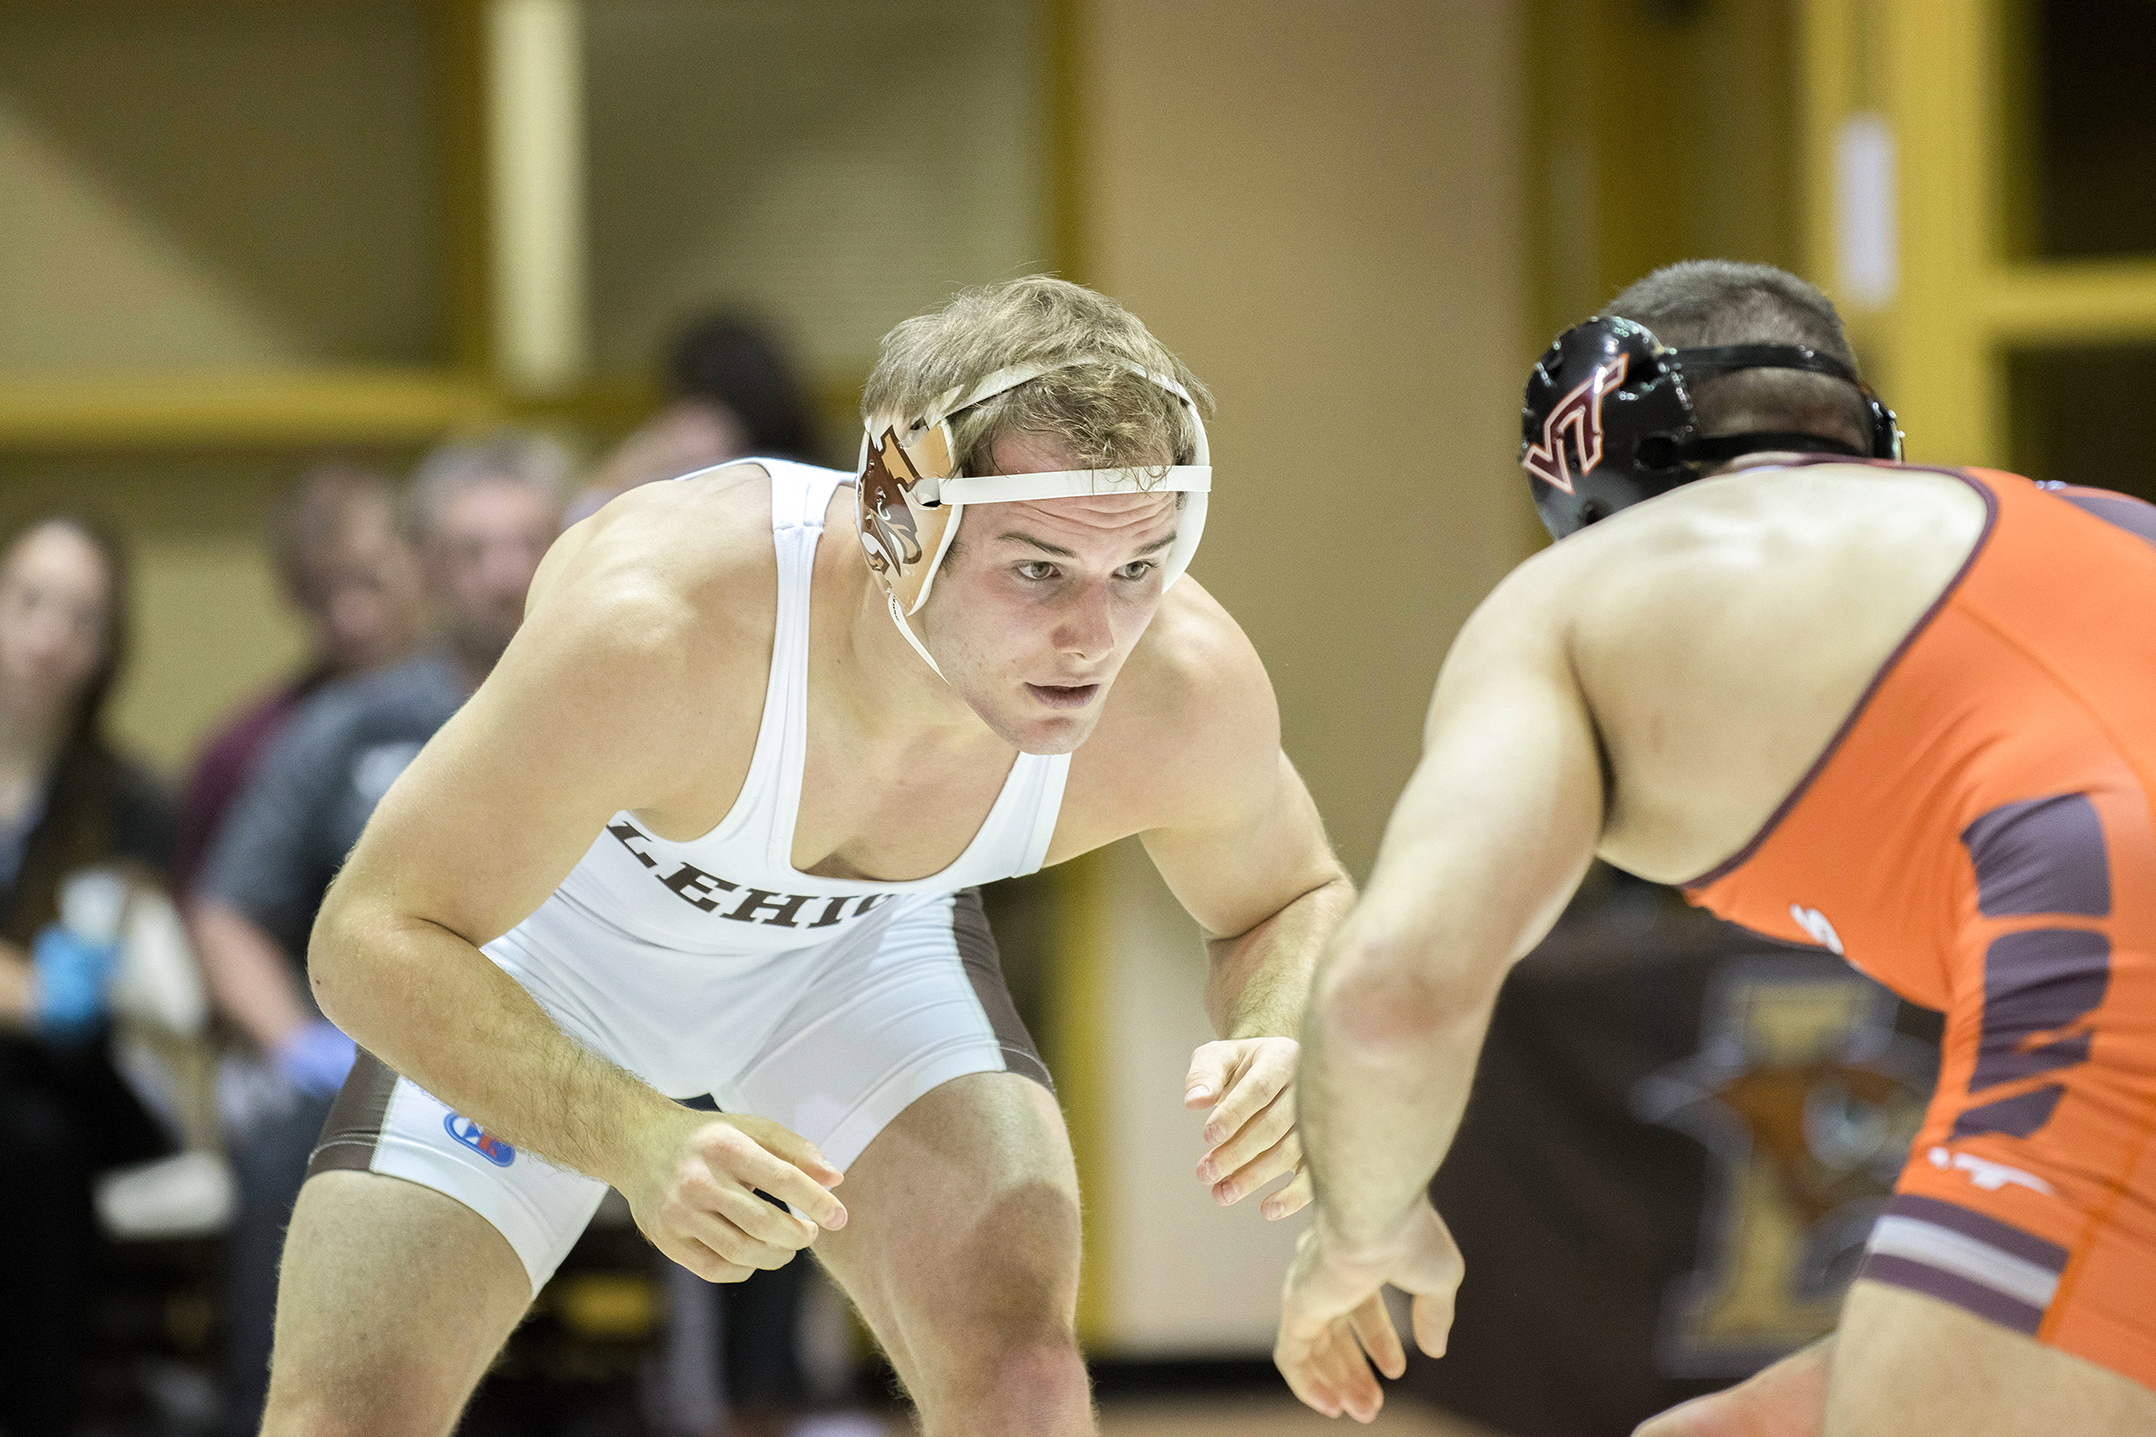 Senior send-off: Lehigh wrestling to battle Army in season finale - The Brown and White